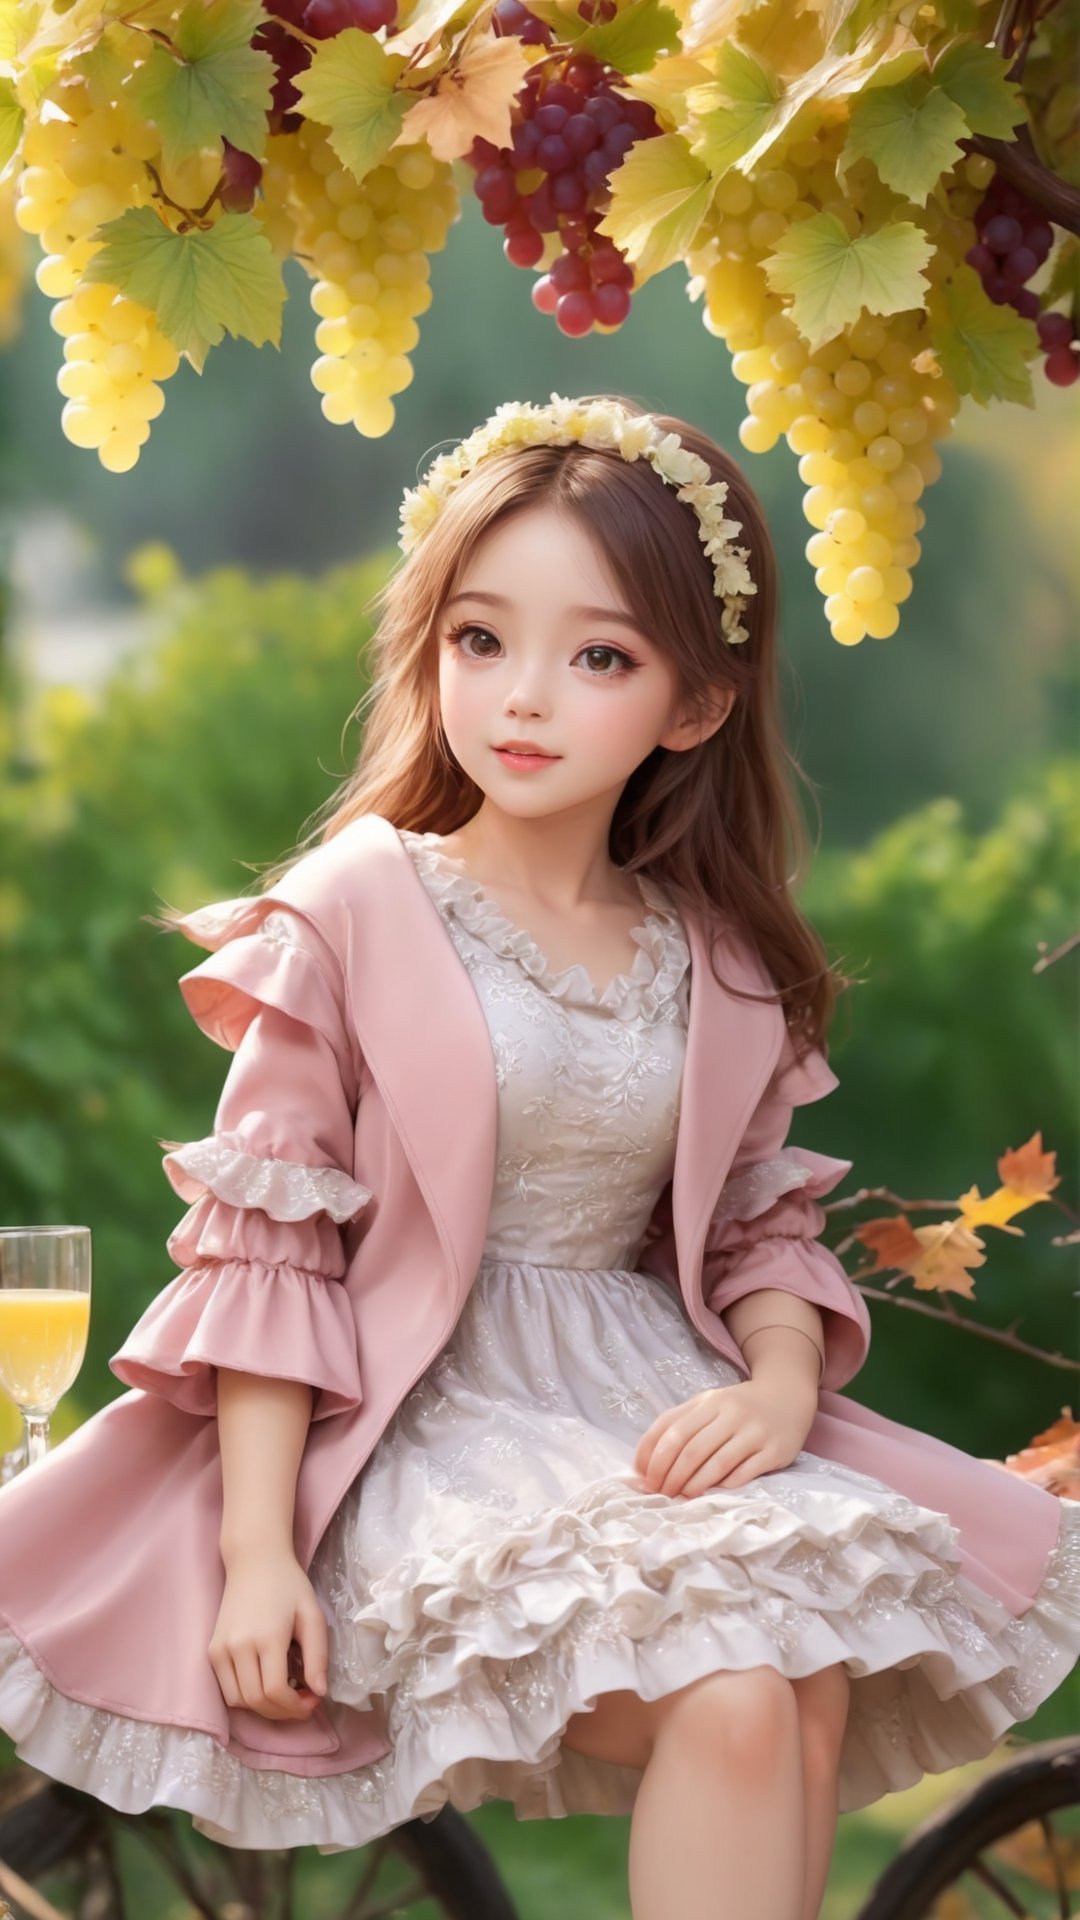 Side view, Autumn style, realistic high quality grapes tree, grapes full the branch, maple leaves falling, 1girl, big eyes so charming, happy,  under the tree have a table, and grape and beautiful flowers, maple leaves falling, and a adorable lovely cute big charming eyes girl wearing pink and white Ruffles dress and coat, holding juice 
 near flowers, Turn around and look viewers , pink flowers blooming fantastic amazing and romantic lighting bokeh, yellow flowers blooming realistic and green plants amazing tale and lighting as background, Xxmix_Catecat